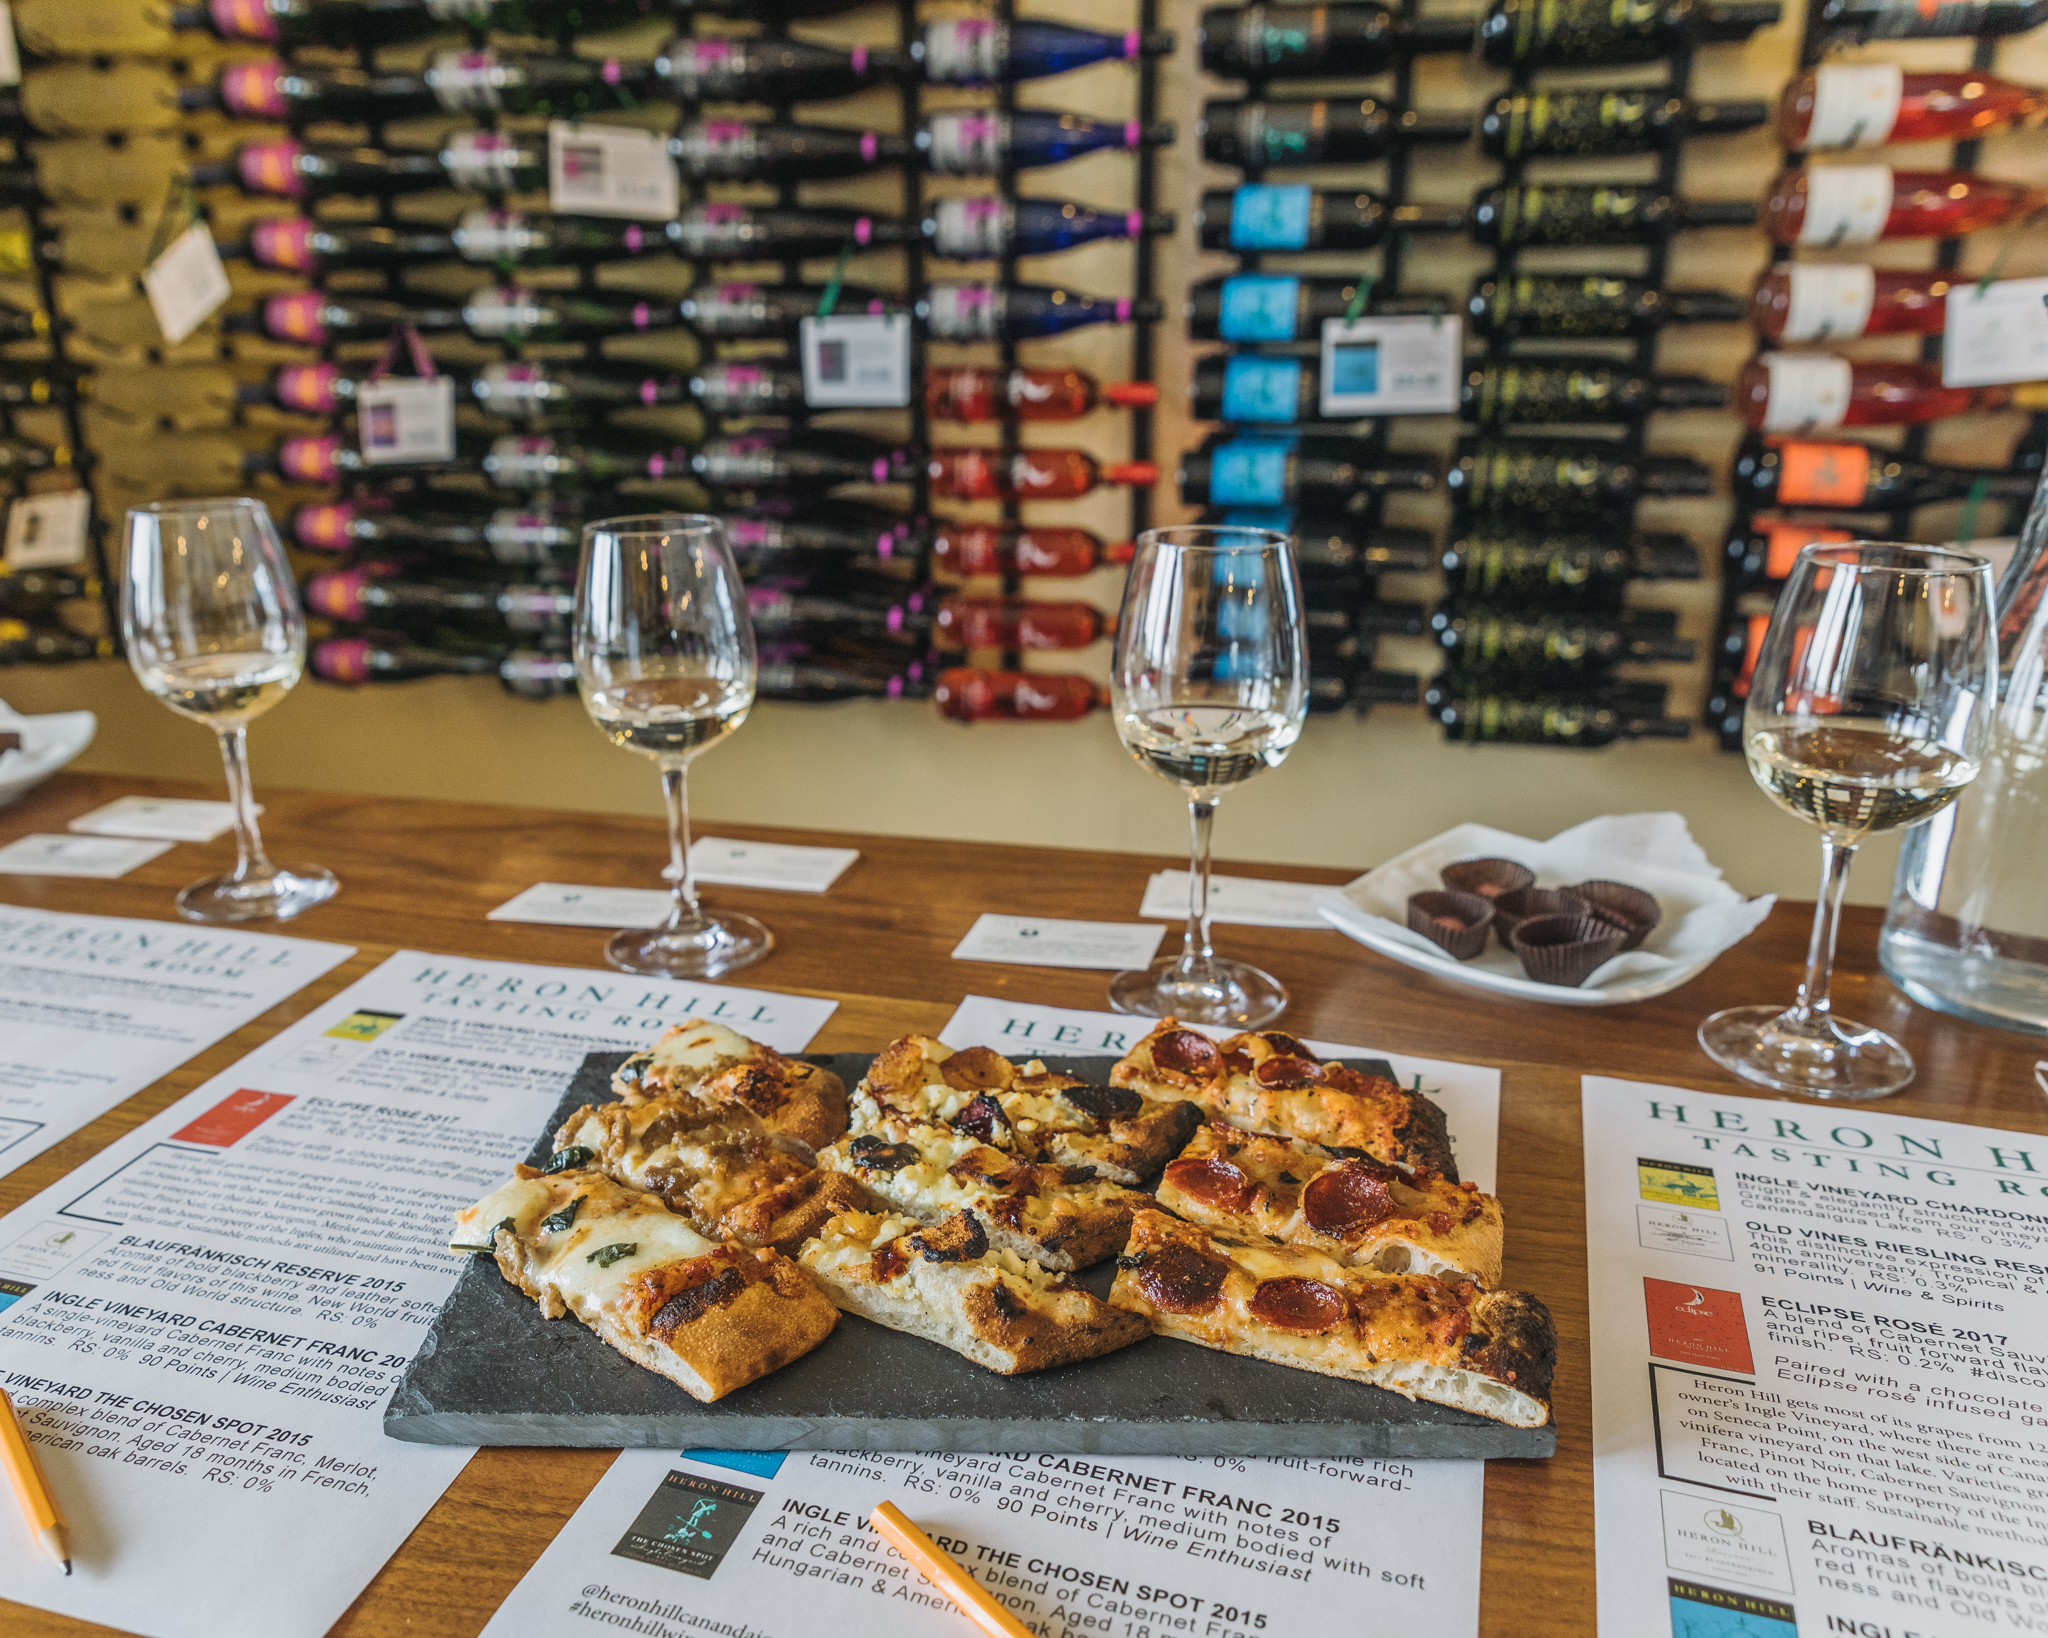 Pizza and wine at Heron Hill Tasting Room // 3 Days in the Finger Lakes: A Wine Trail Itinerary